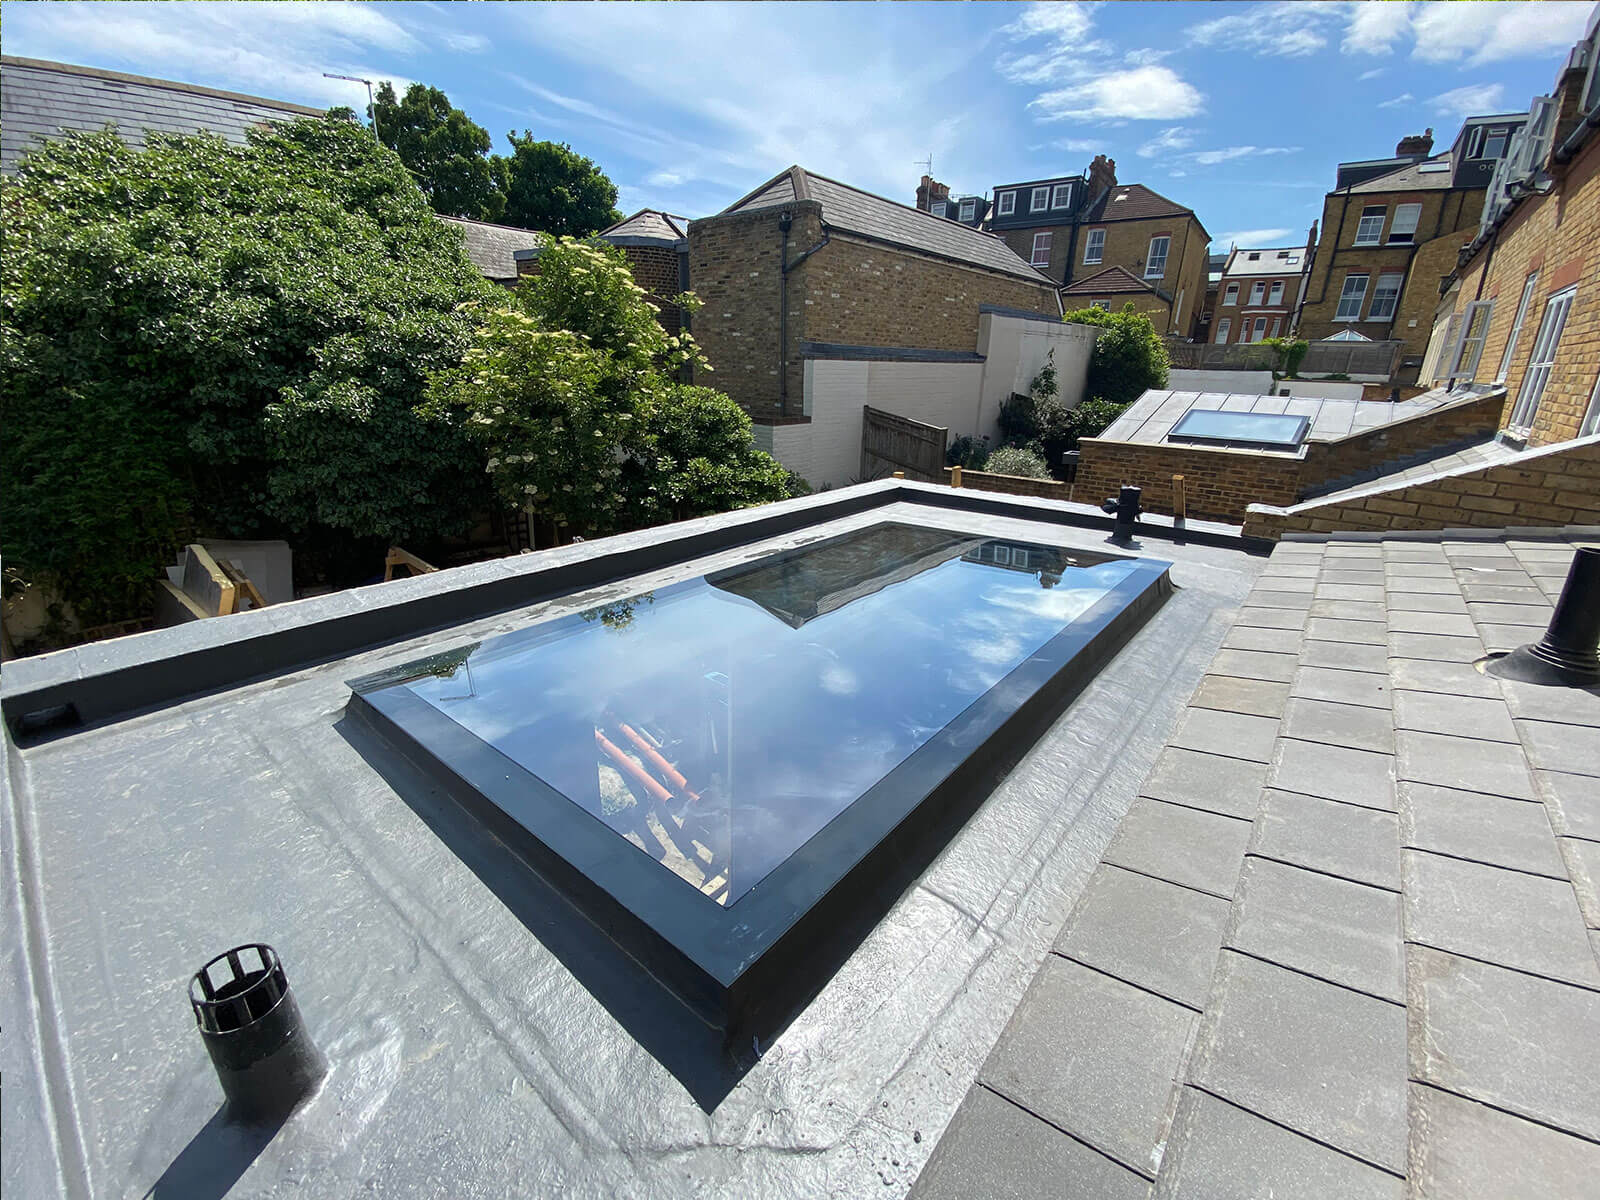 DOUBLE GLAZED SKYLIGHTS 800x800mm - Saris-Extensions.co.uk